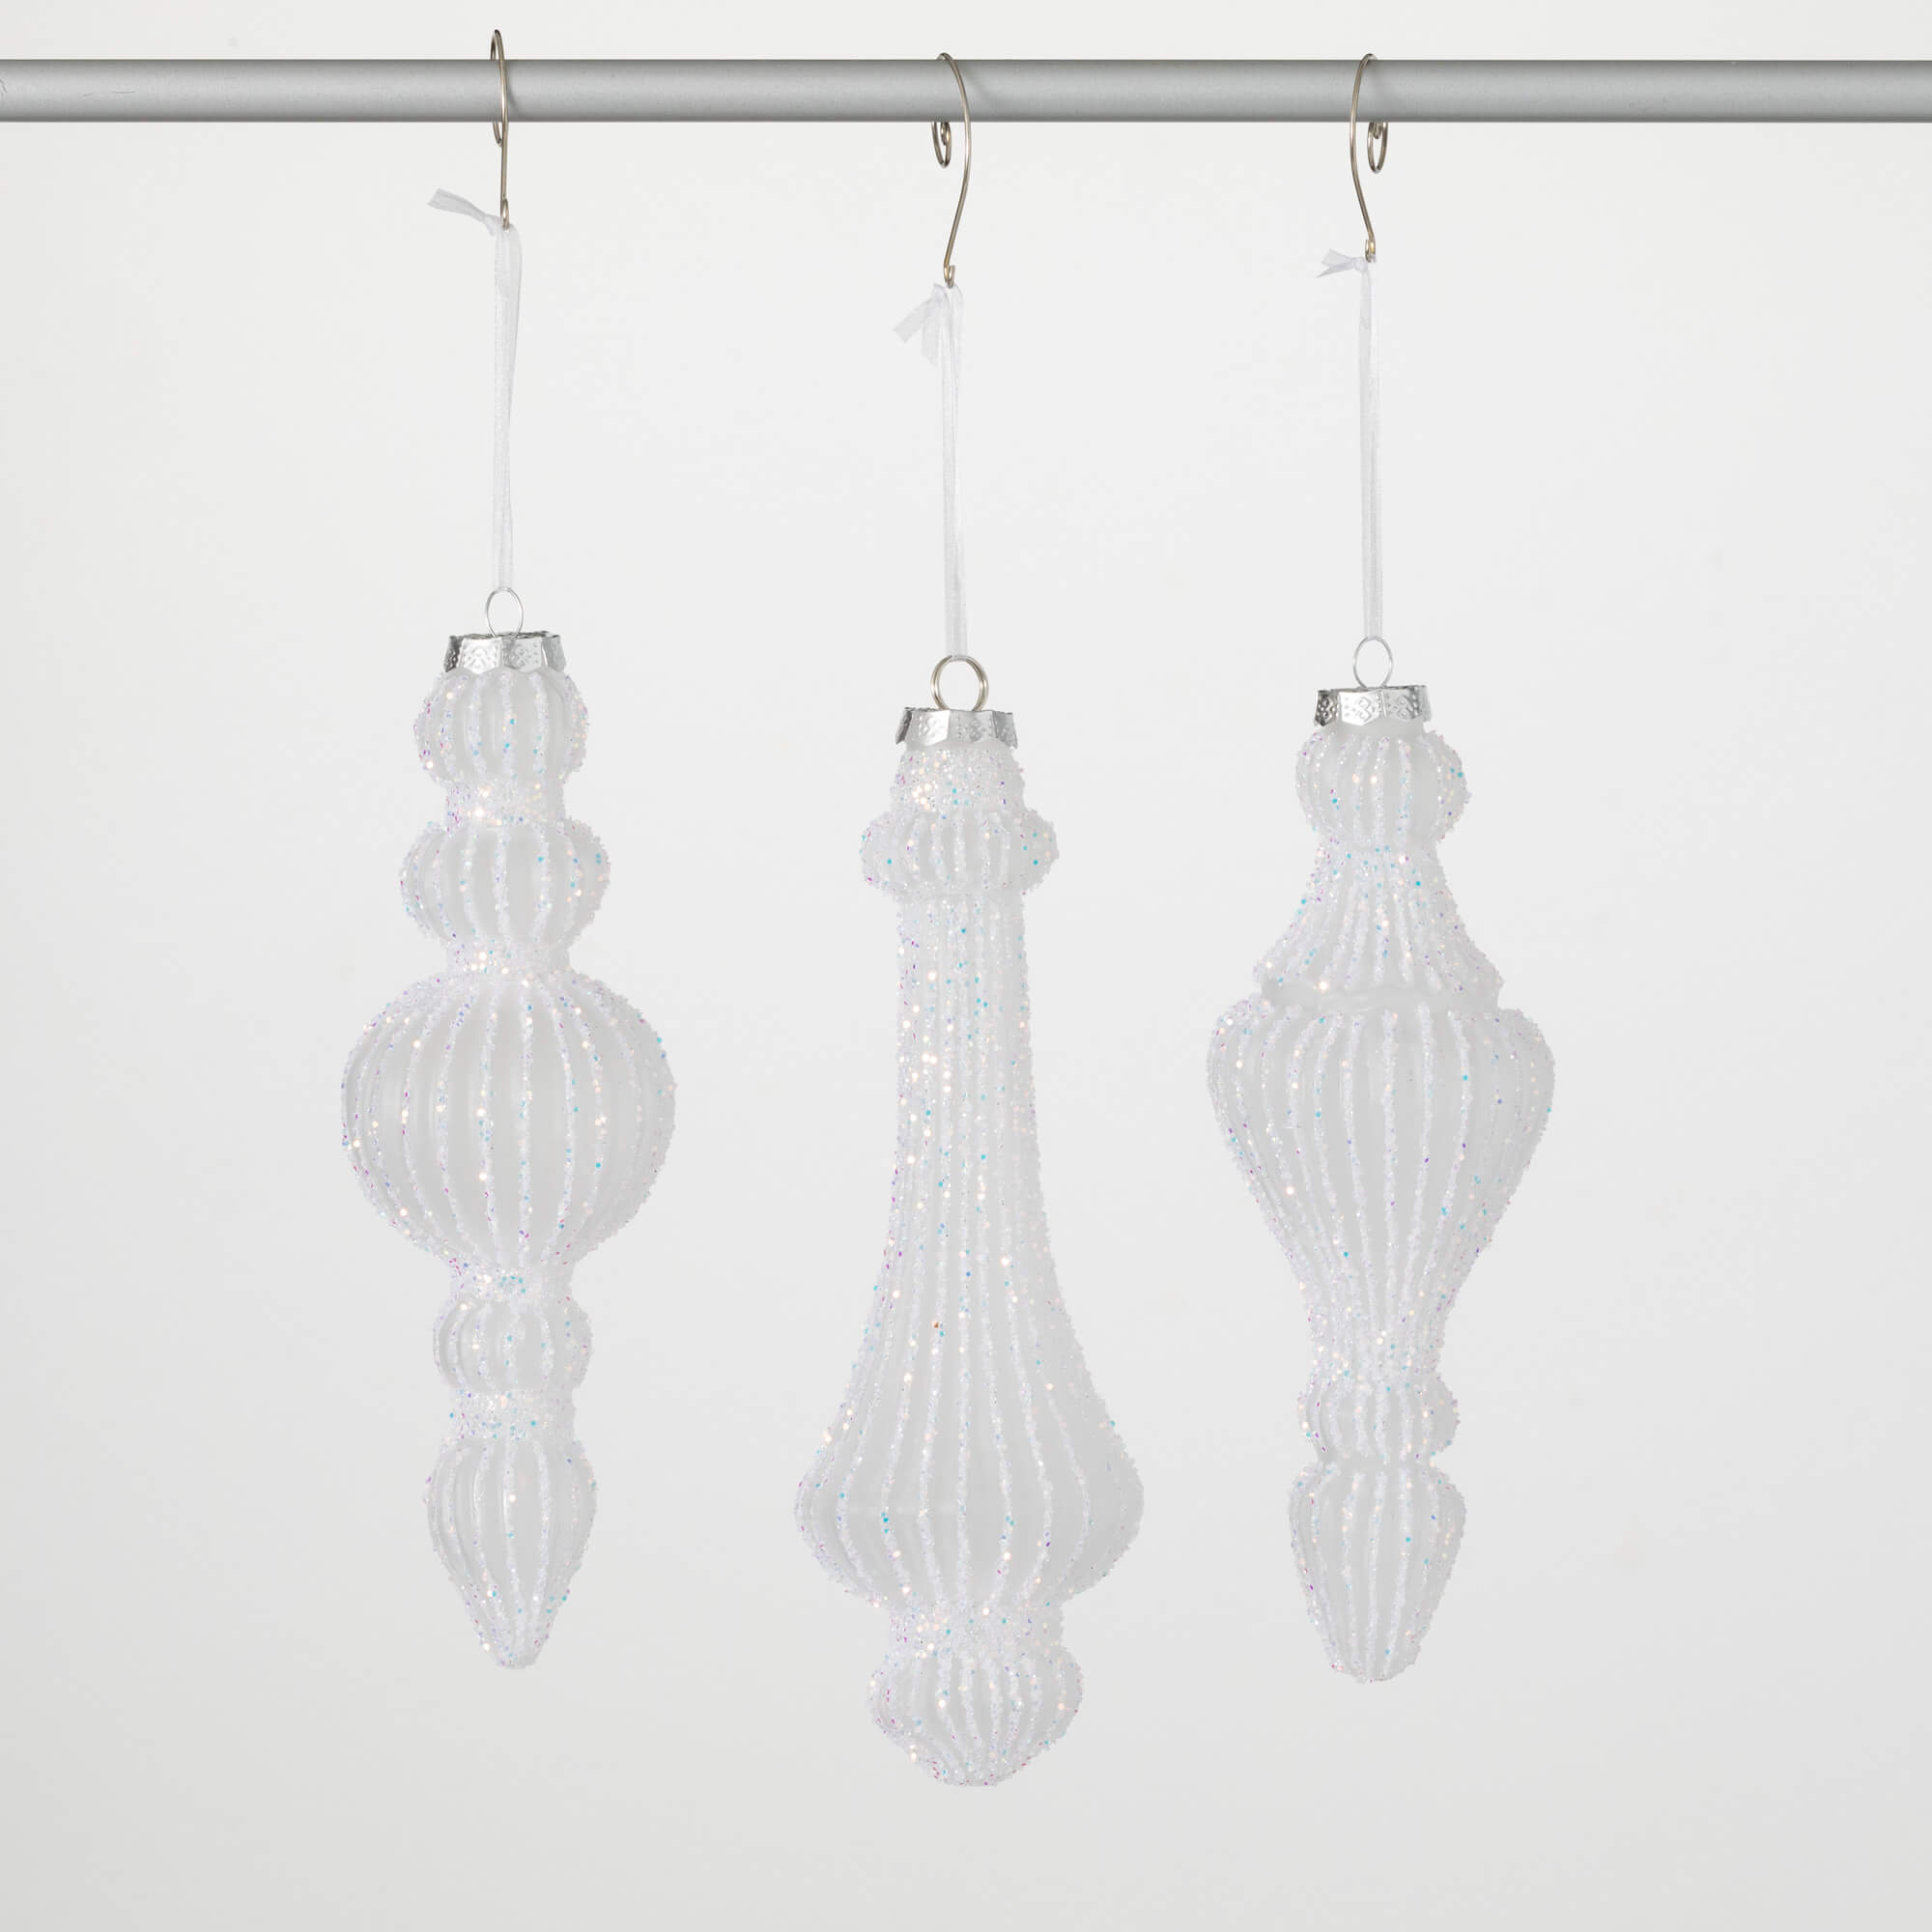 OPAQUE WHITE FINIAL ORNAMENTS